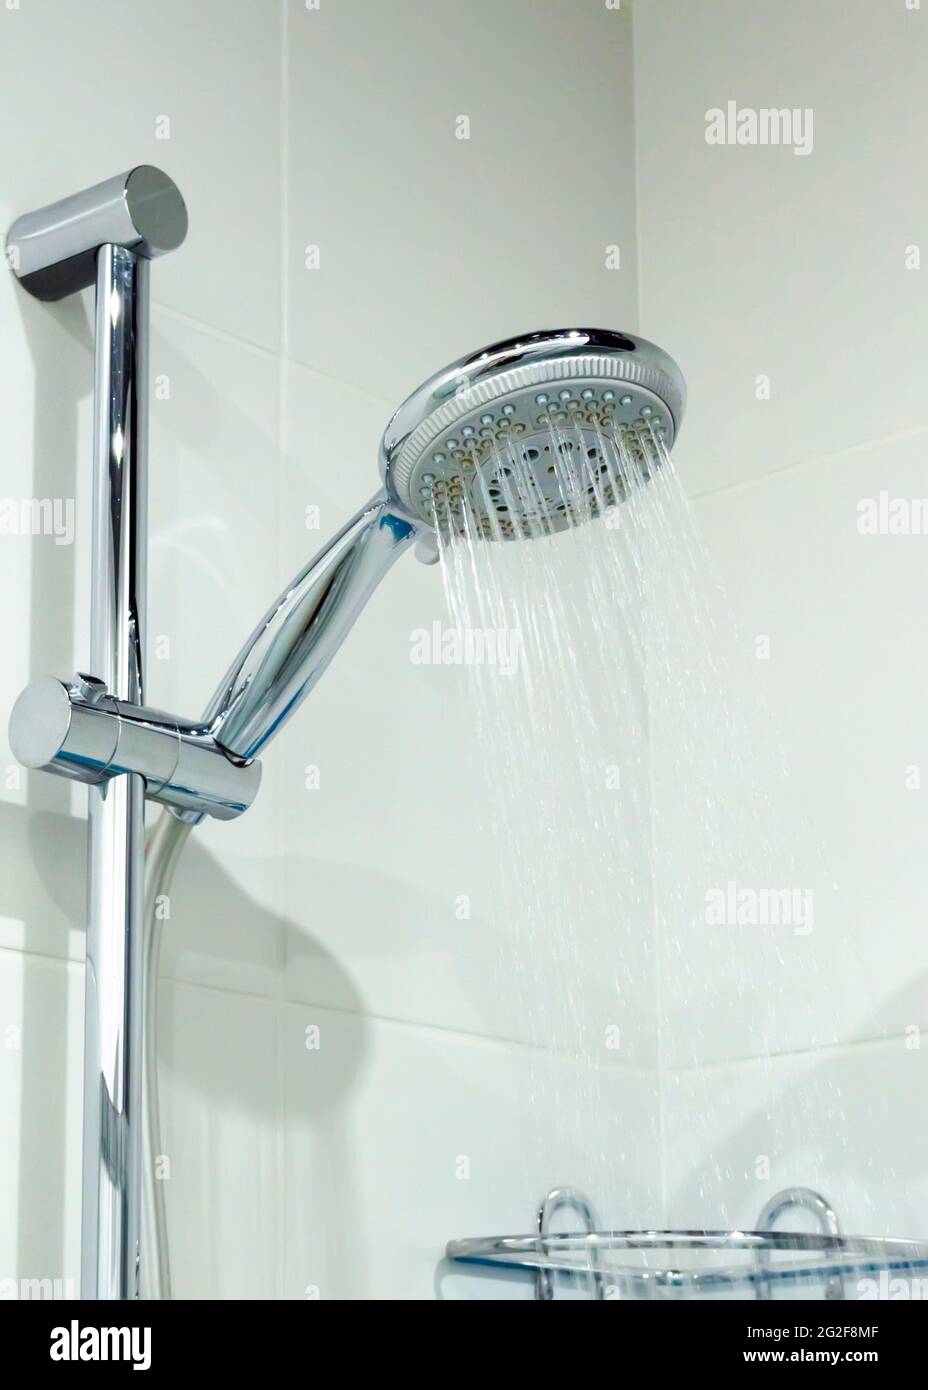 Shower head with jets of water close-up in the bathroom. Stock Photo